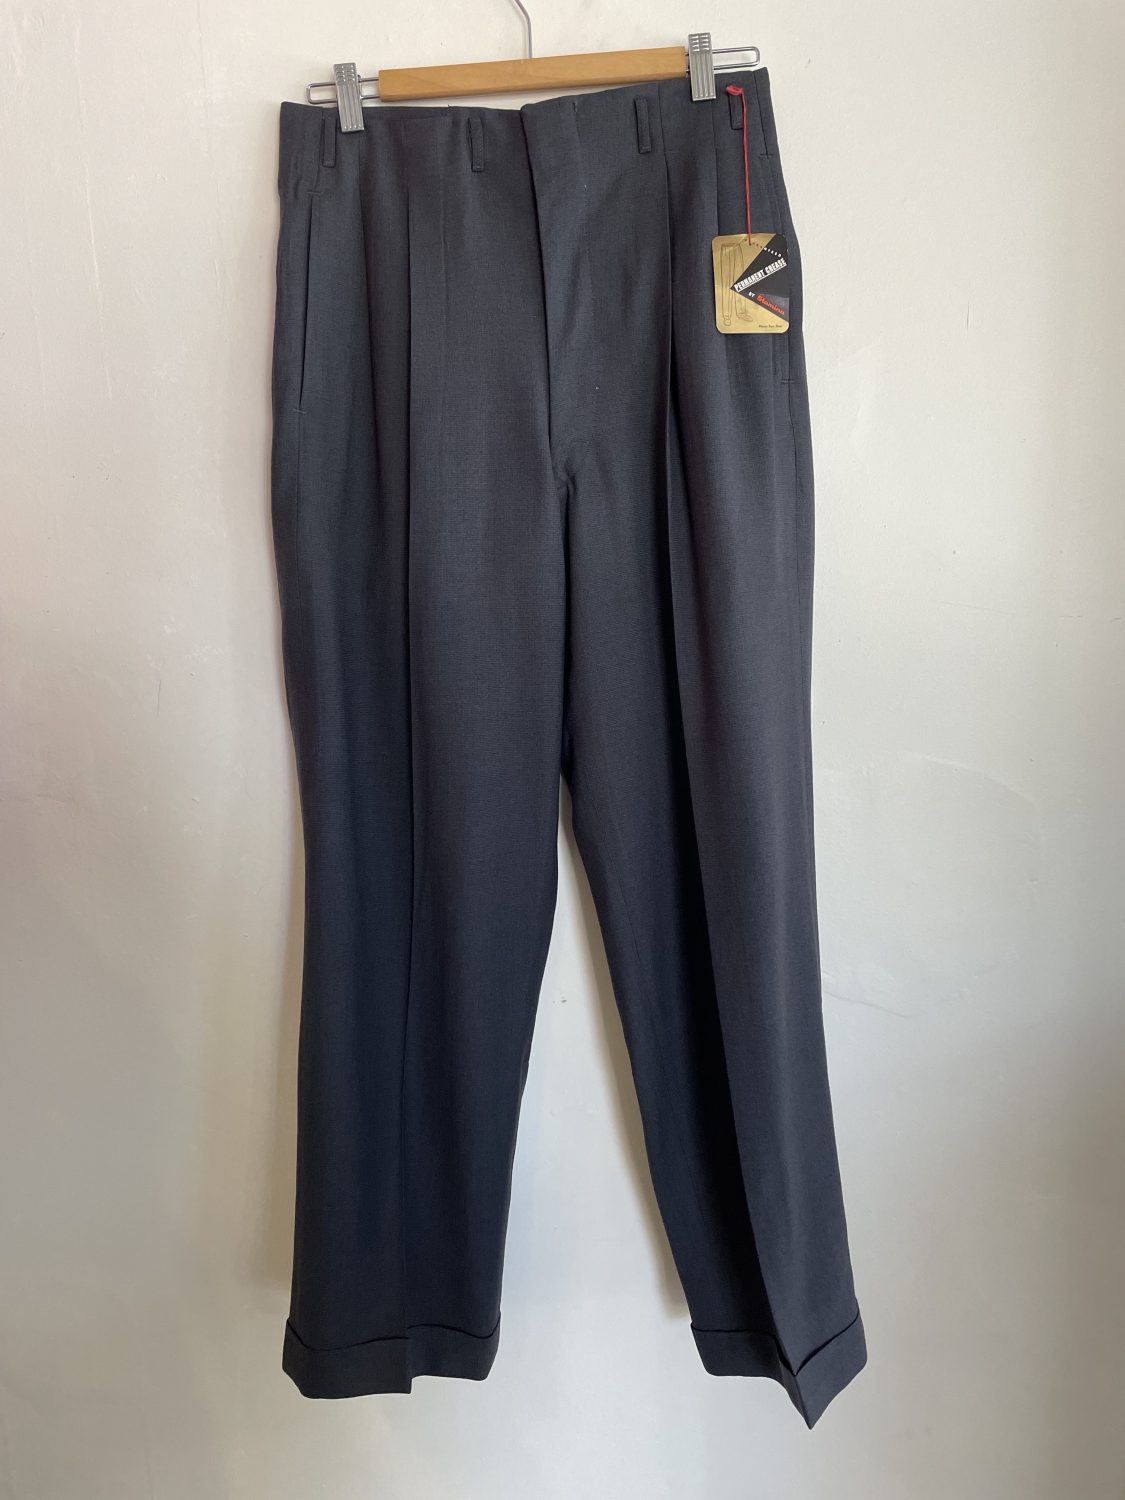 CHARCOAL HOLLYWOOD WAIST VINTAGE DEADSTOCK PURE WOOL 1940s MEN'S PANTS W29x  28